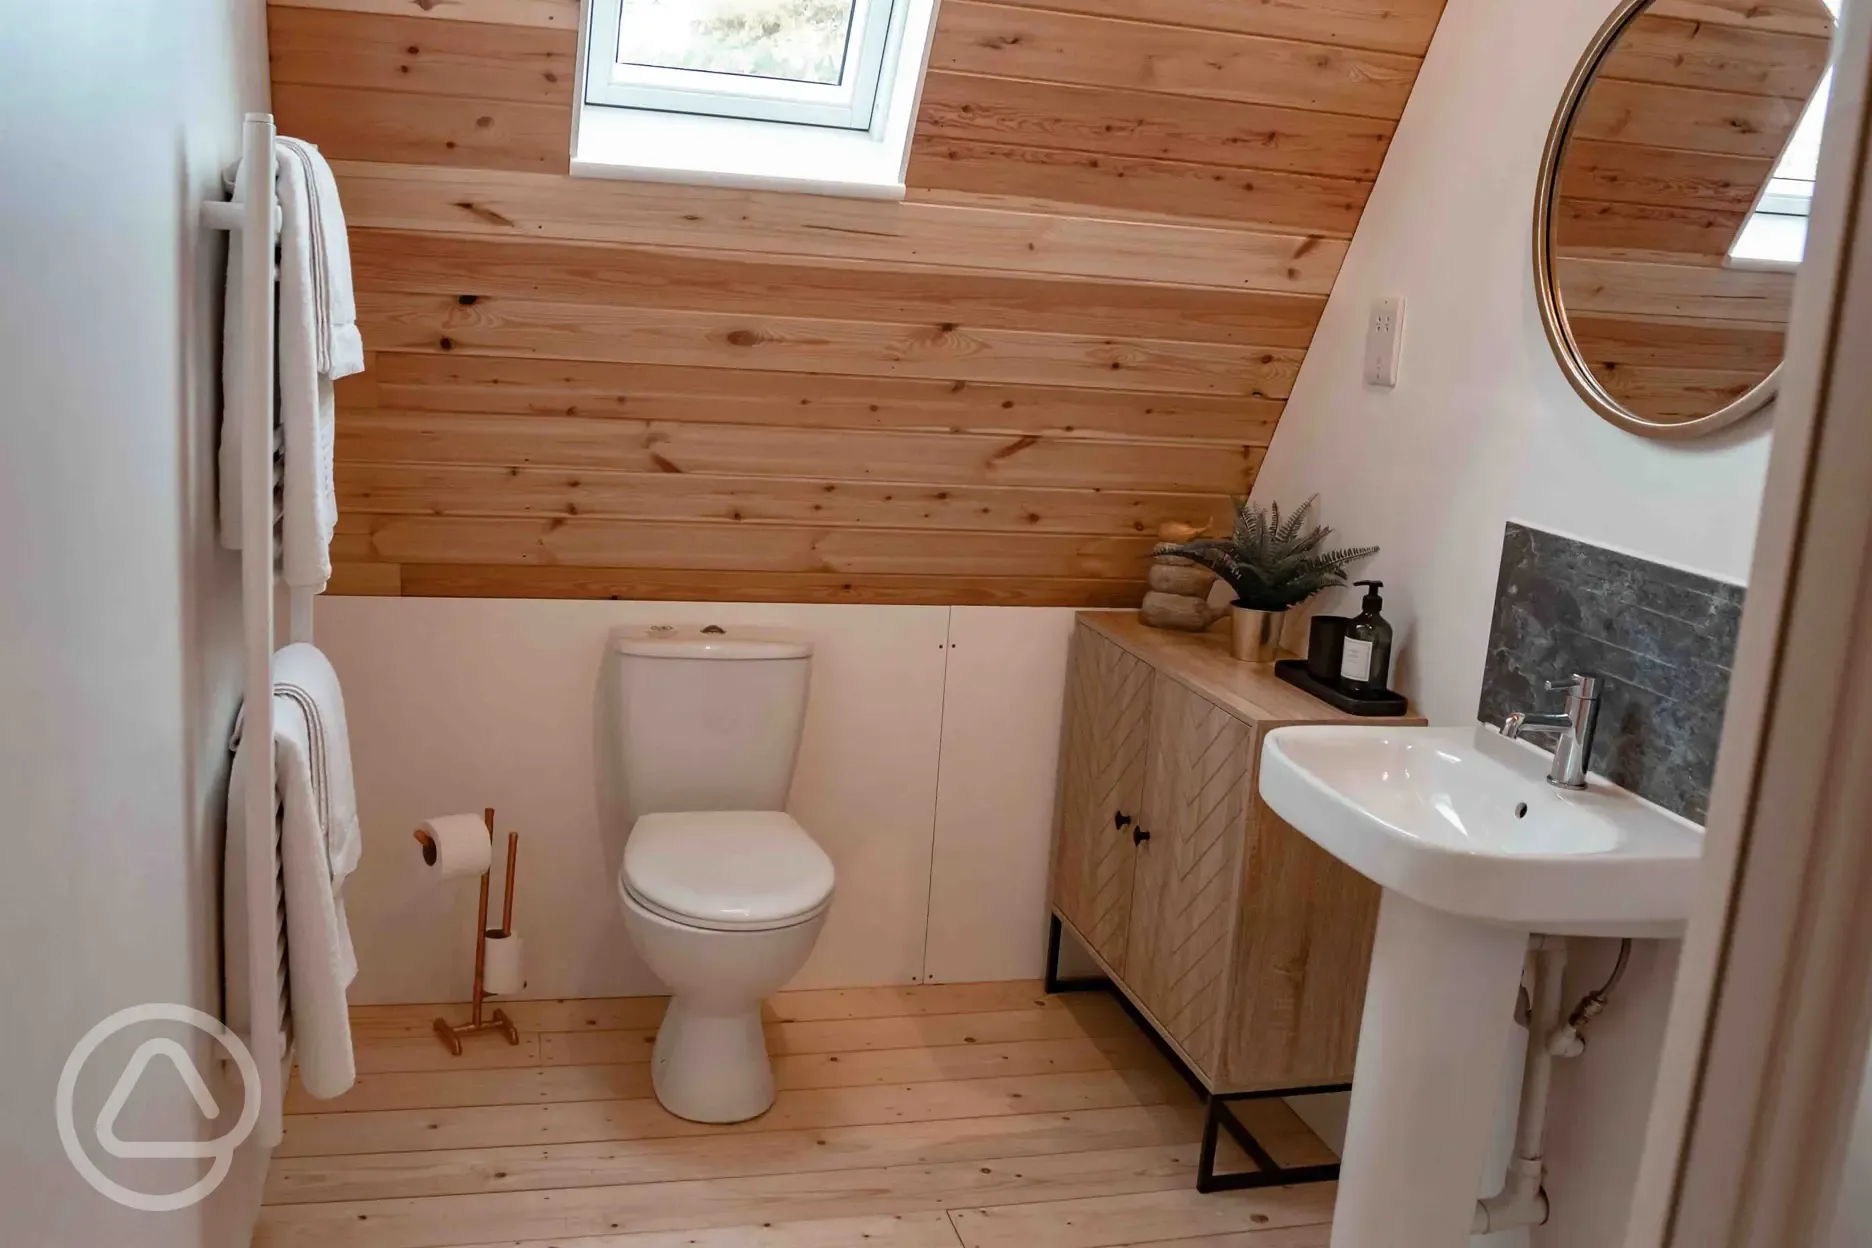  Large family-size shower room in the A-frame with heated towel rail